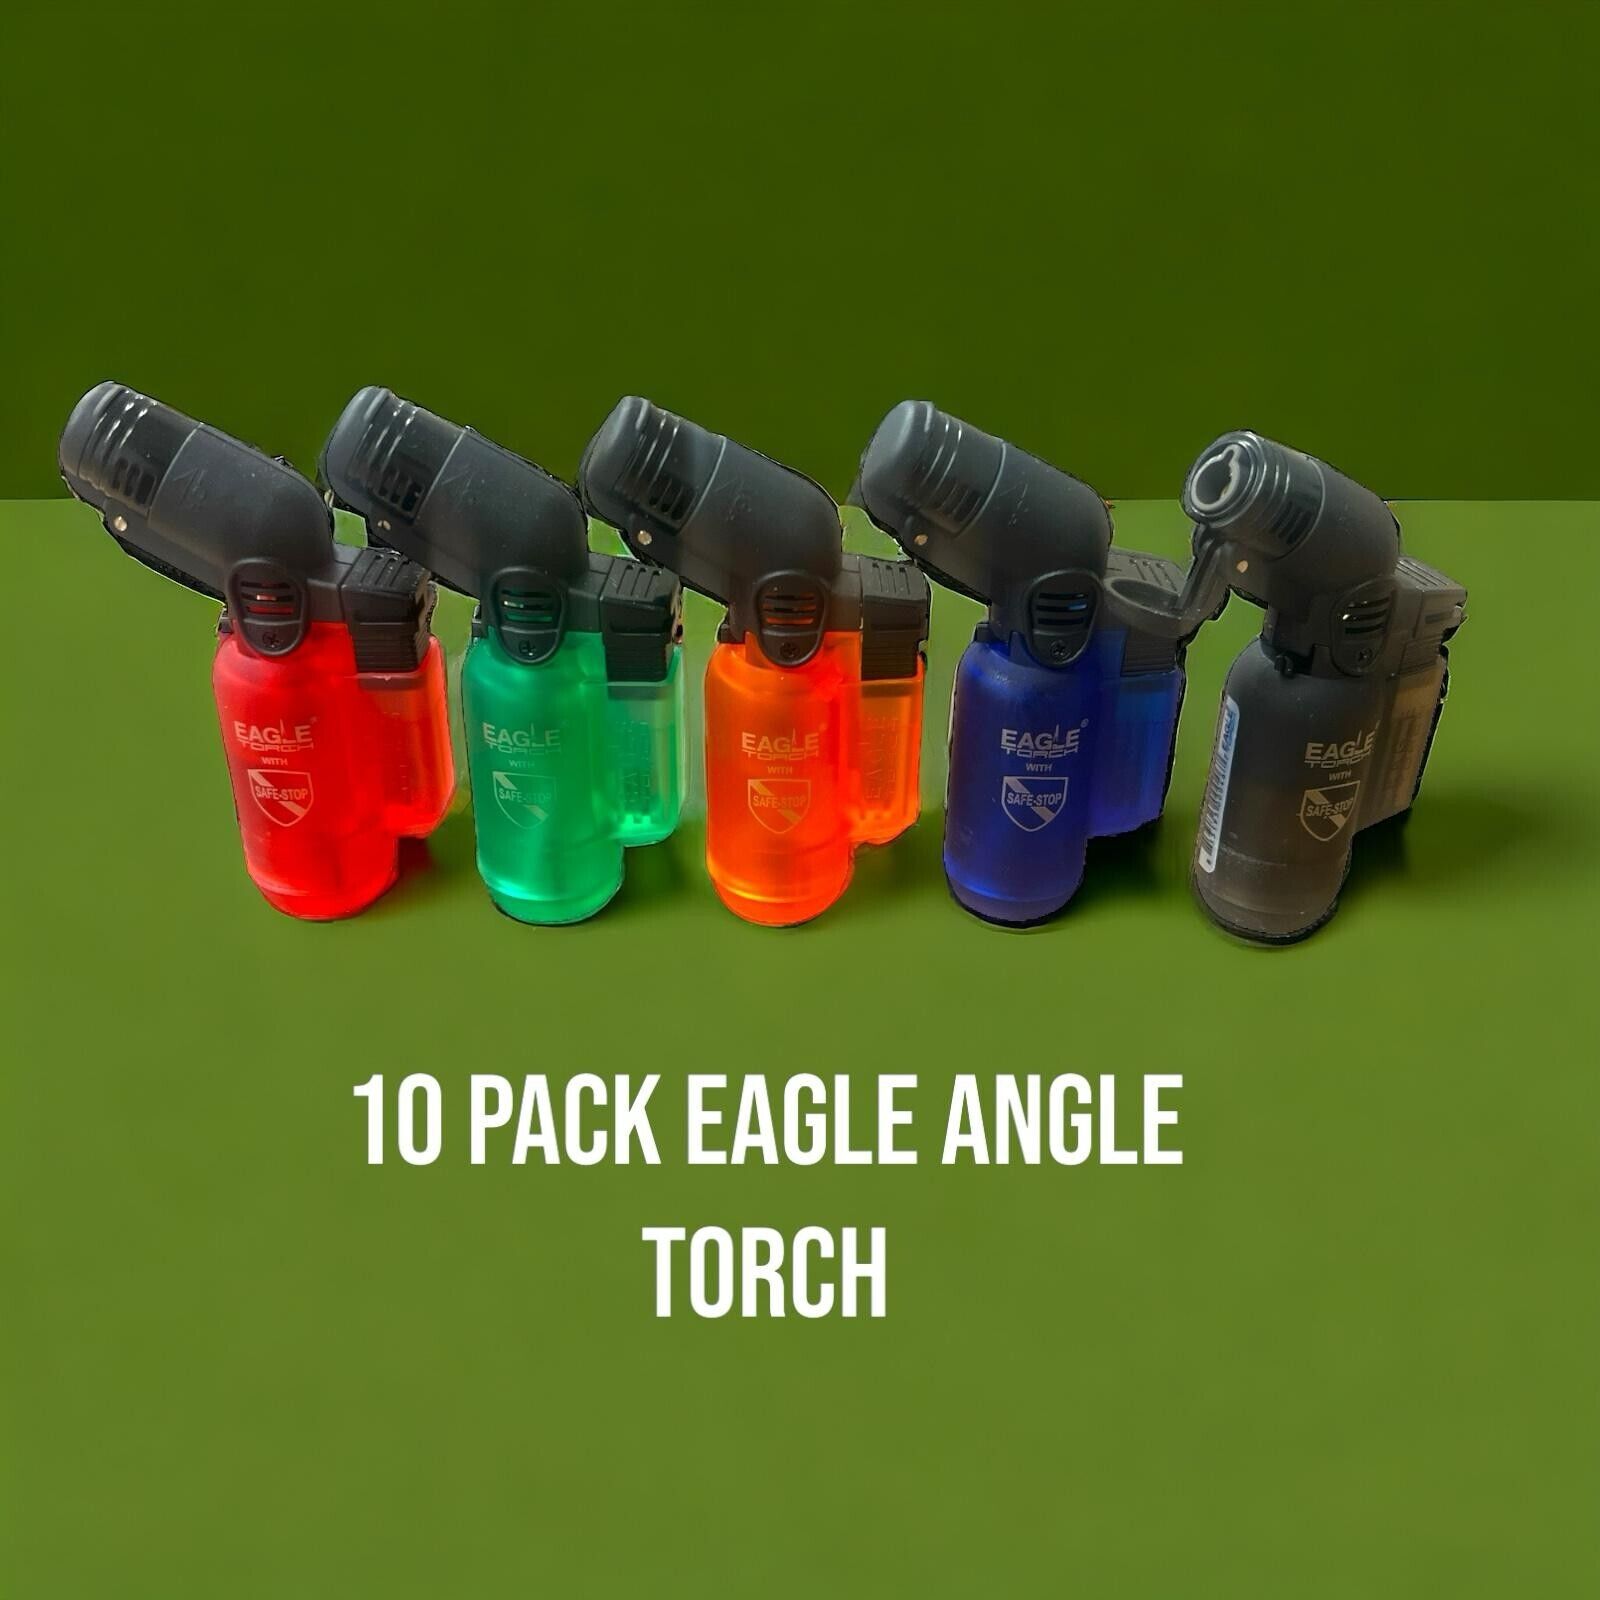 Eagle Mini-Angle Torch Lighter Windproof Refillable Lighter 2 Set- 5-Pack